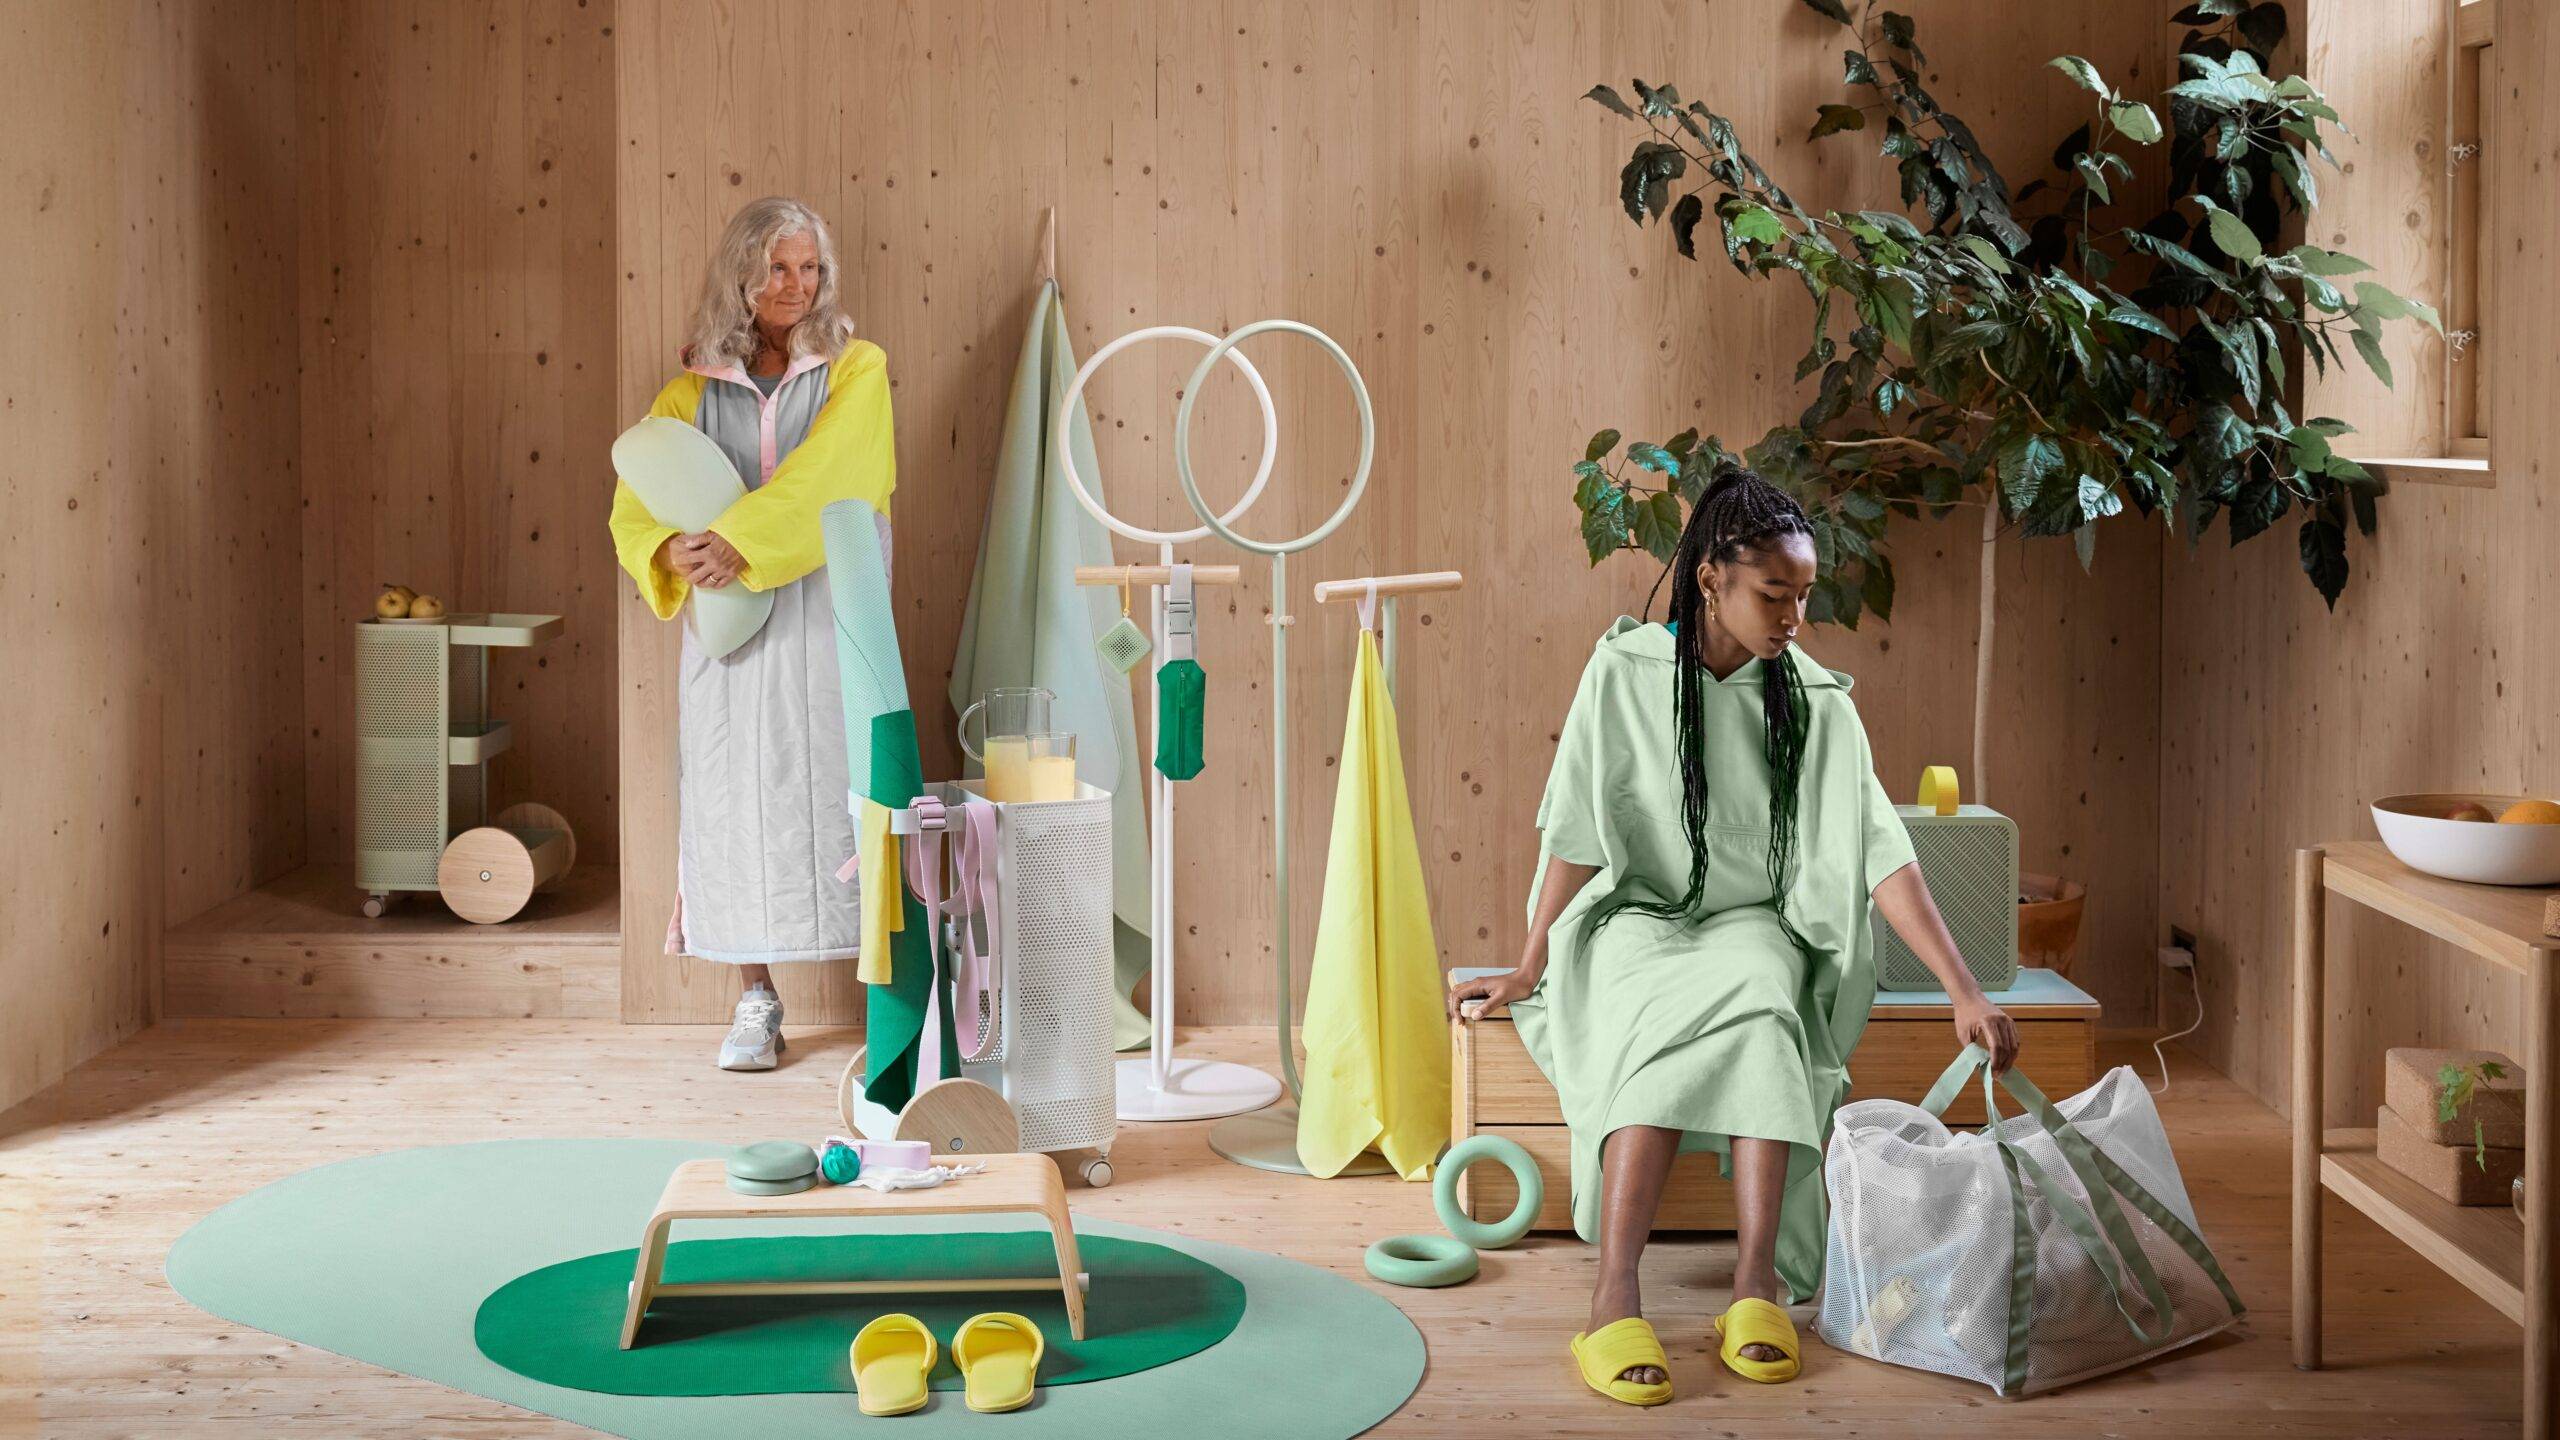 Image of workout gear from the DAJLIEN Collection by IKEA and two women.